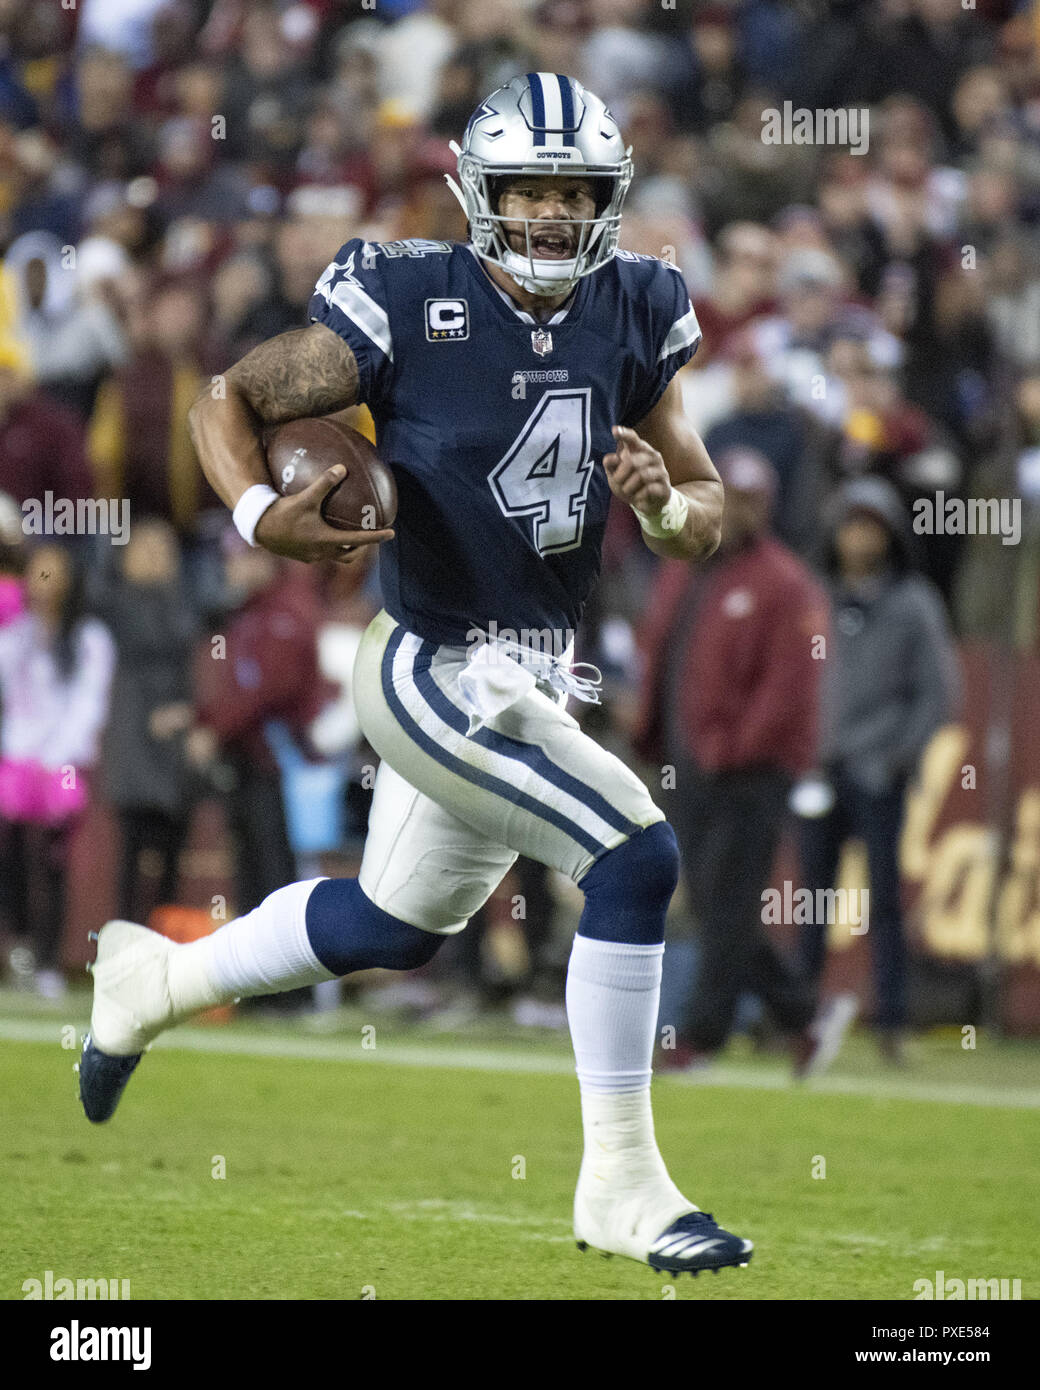 Landover, Maryland, USA. 21st Oct, 2018. Dallas Cowboys quarterback Dak Prescott (4) scrambles for a first down late in the fourth quarter against the Washington Redskins at FedEx Field in Landover, Maryland on Sunday, October 21, 2018. The Redskins won the game 20 - 17 Credit: Ron Sachs/CNP/ZUMA Wire/Alamy Live News Stock Photo